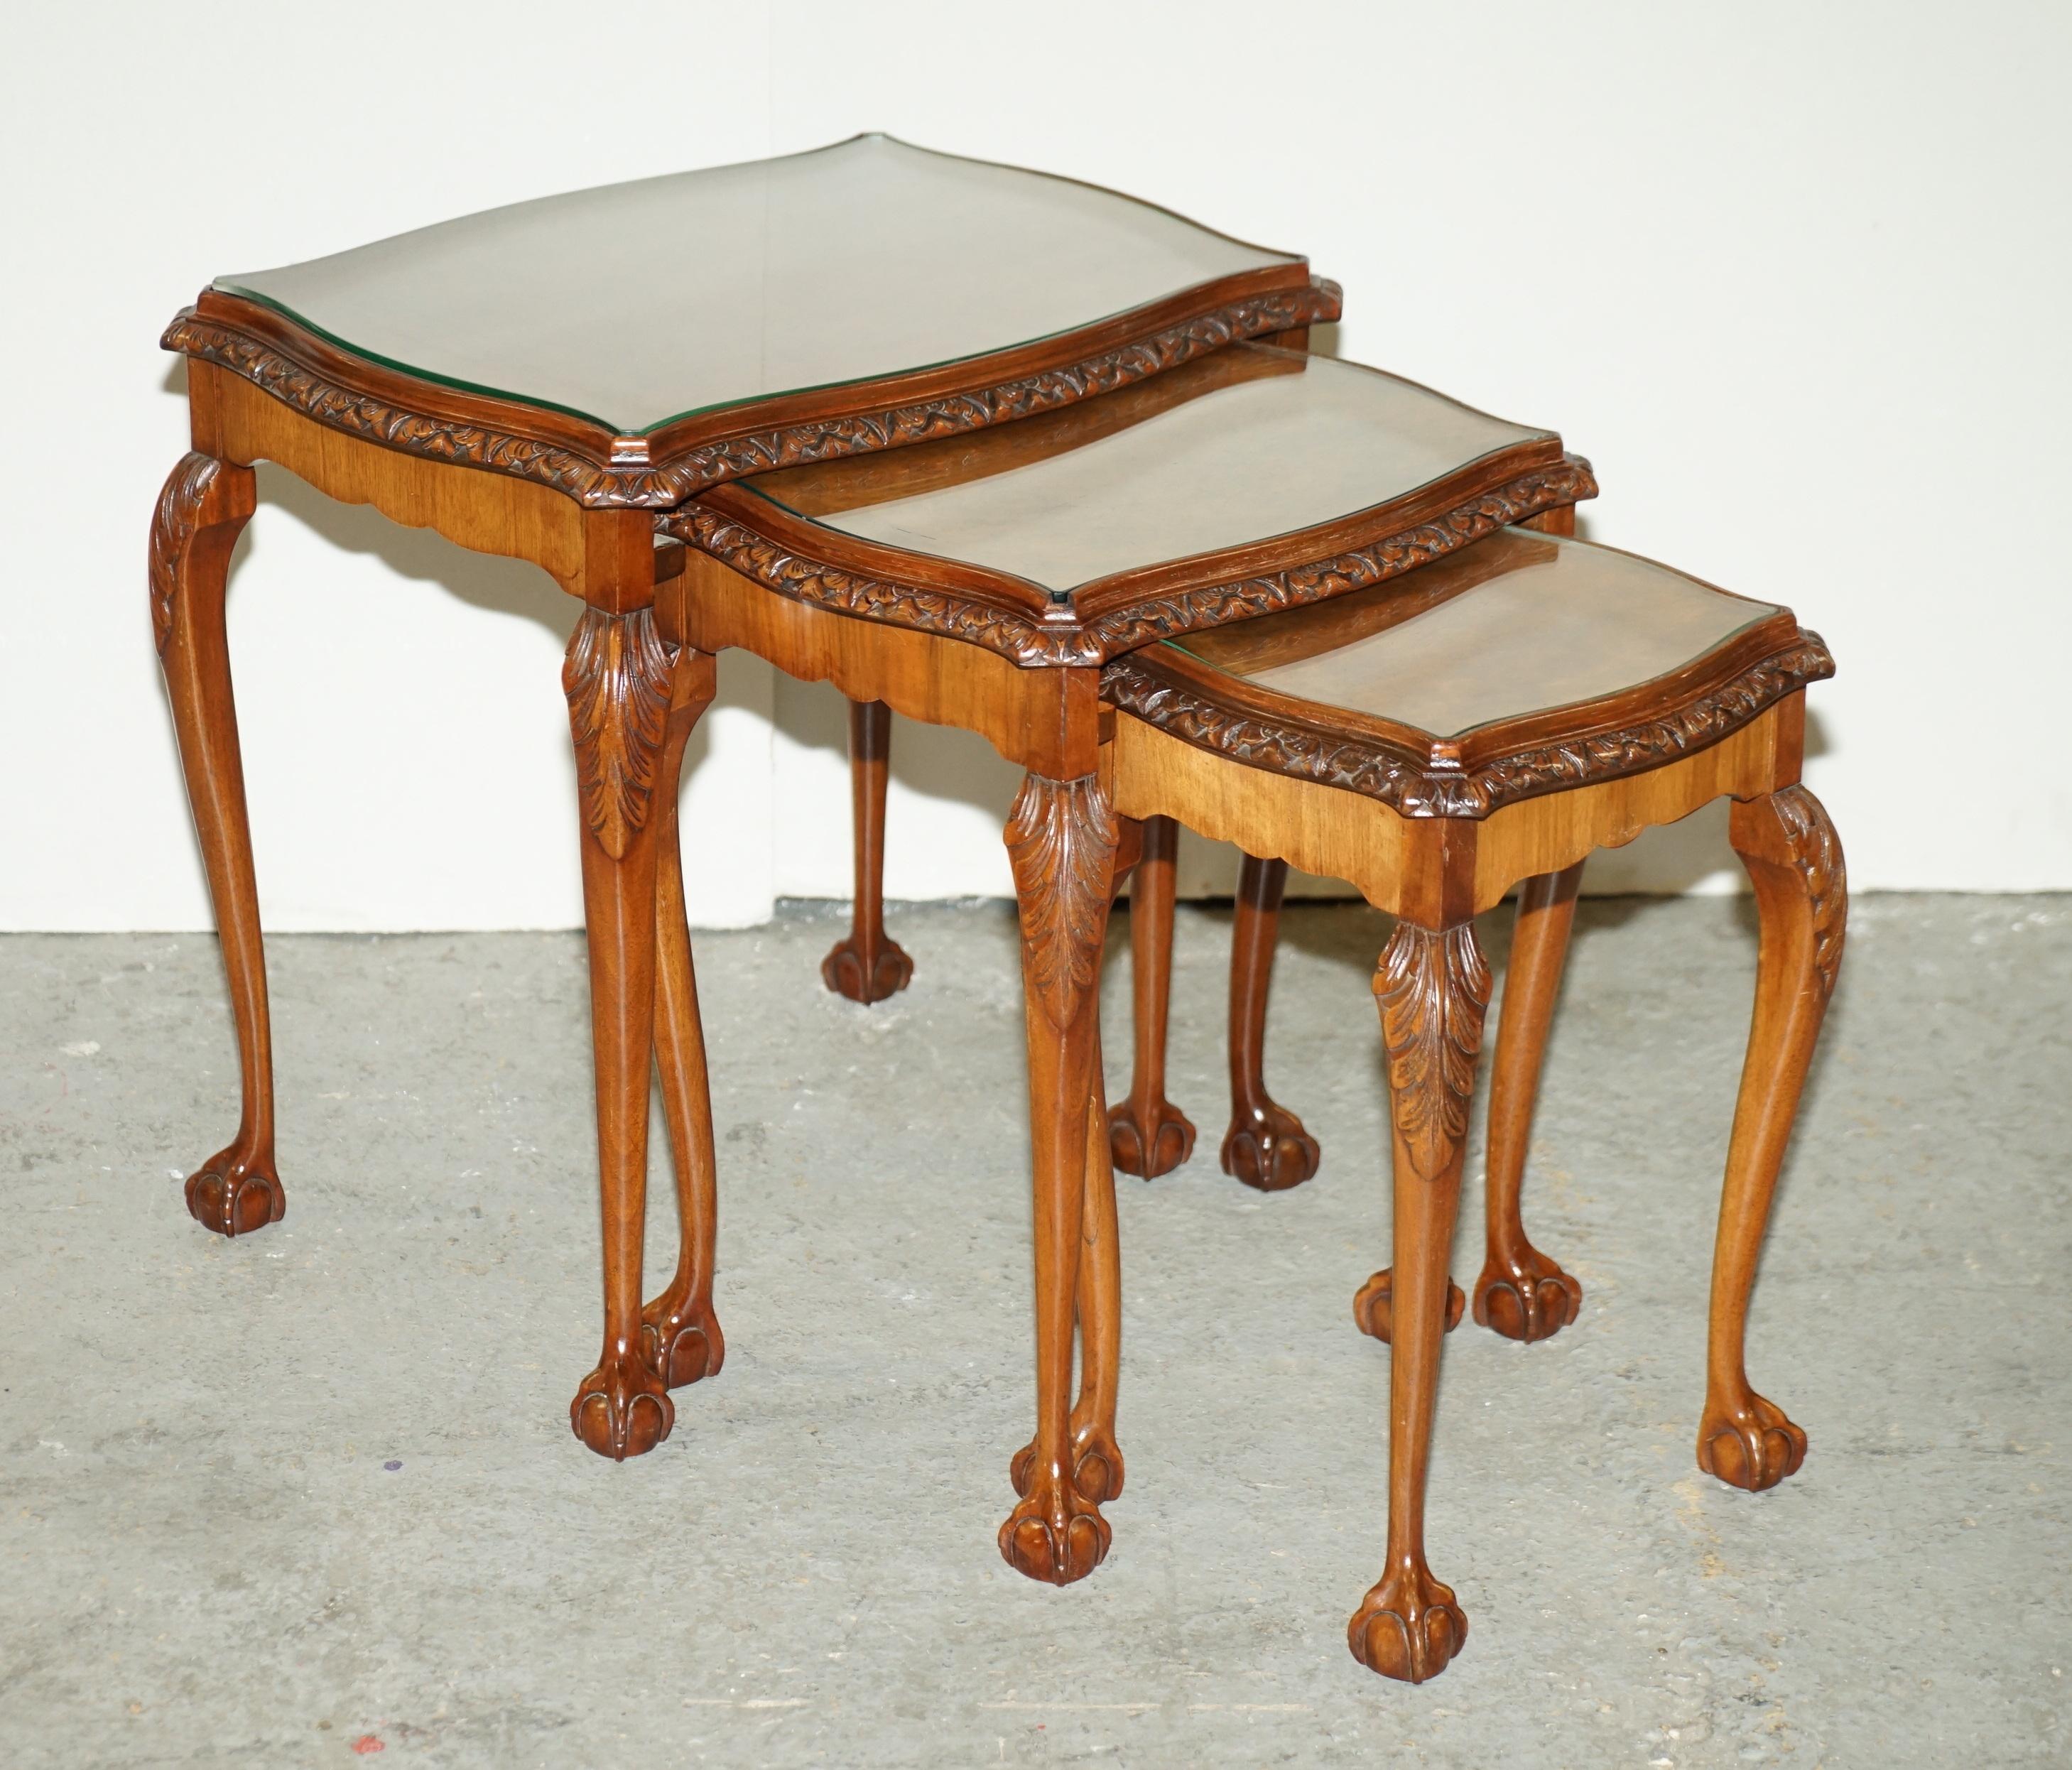 Regency Antique Burr Walnut Serpentine Nest of 3 Stacking Tables with Claw and Ball Feet For Sale